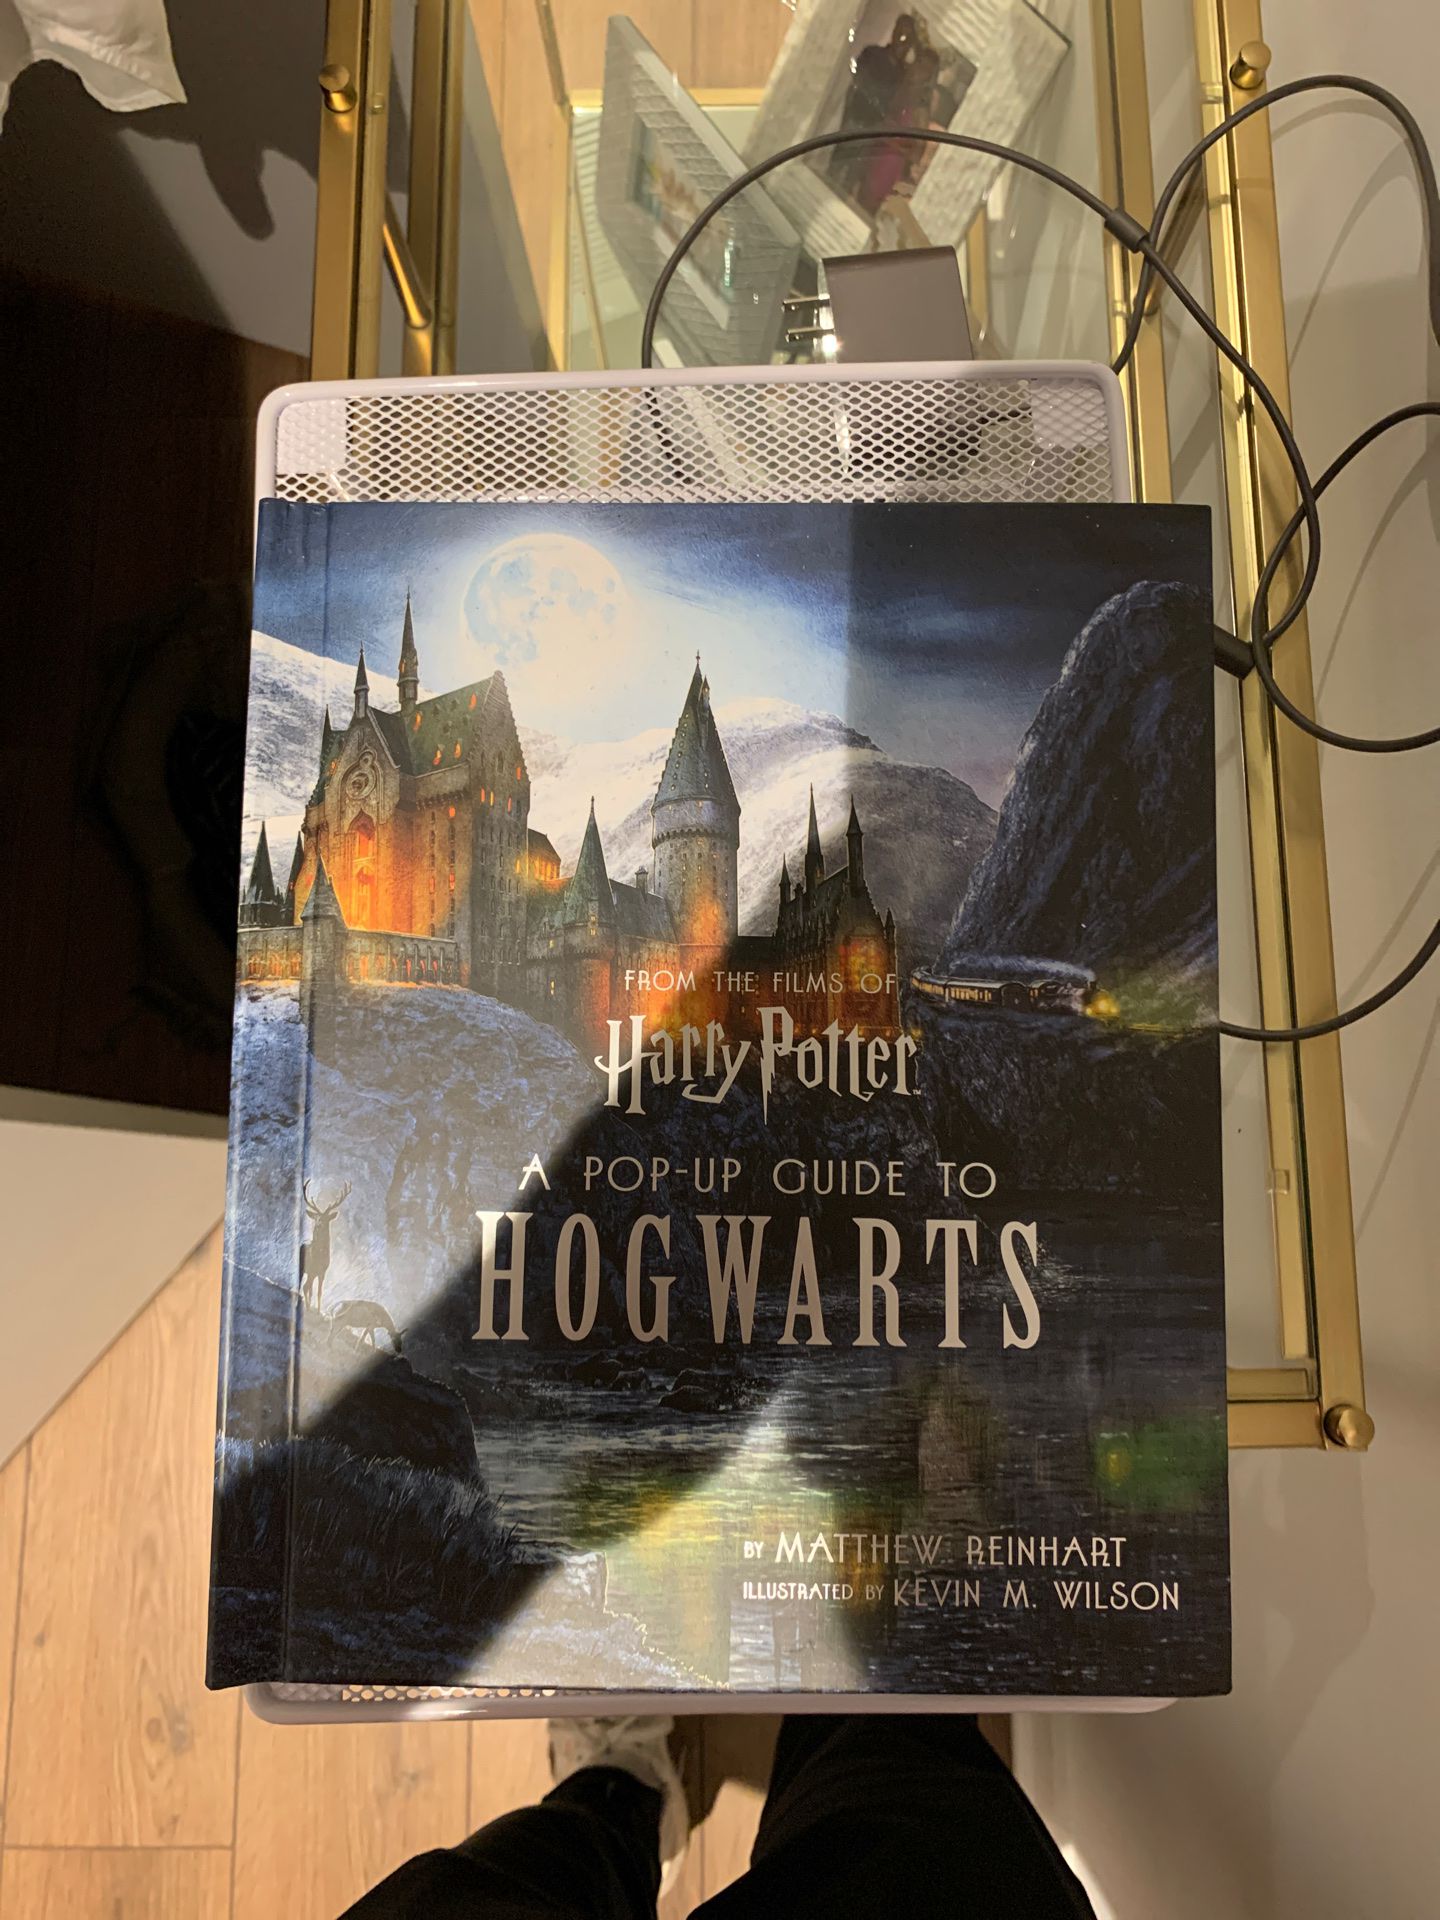 Harry Potter - A PopUp Guide to Hogwarts